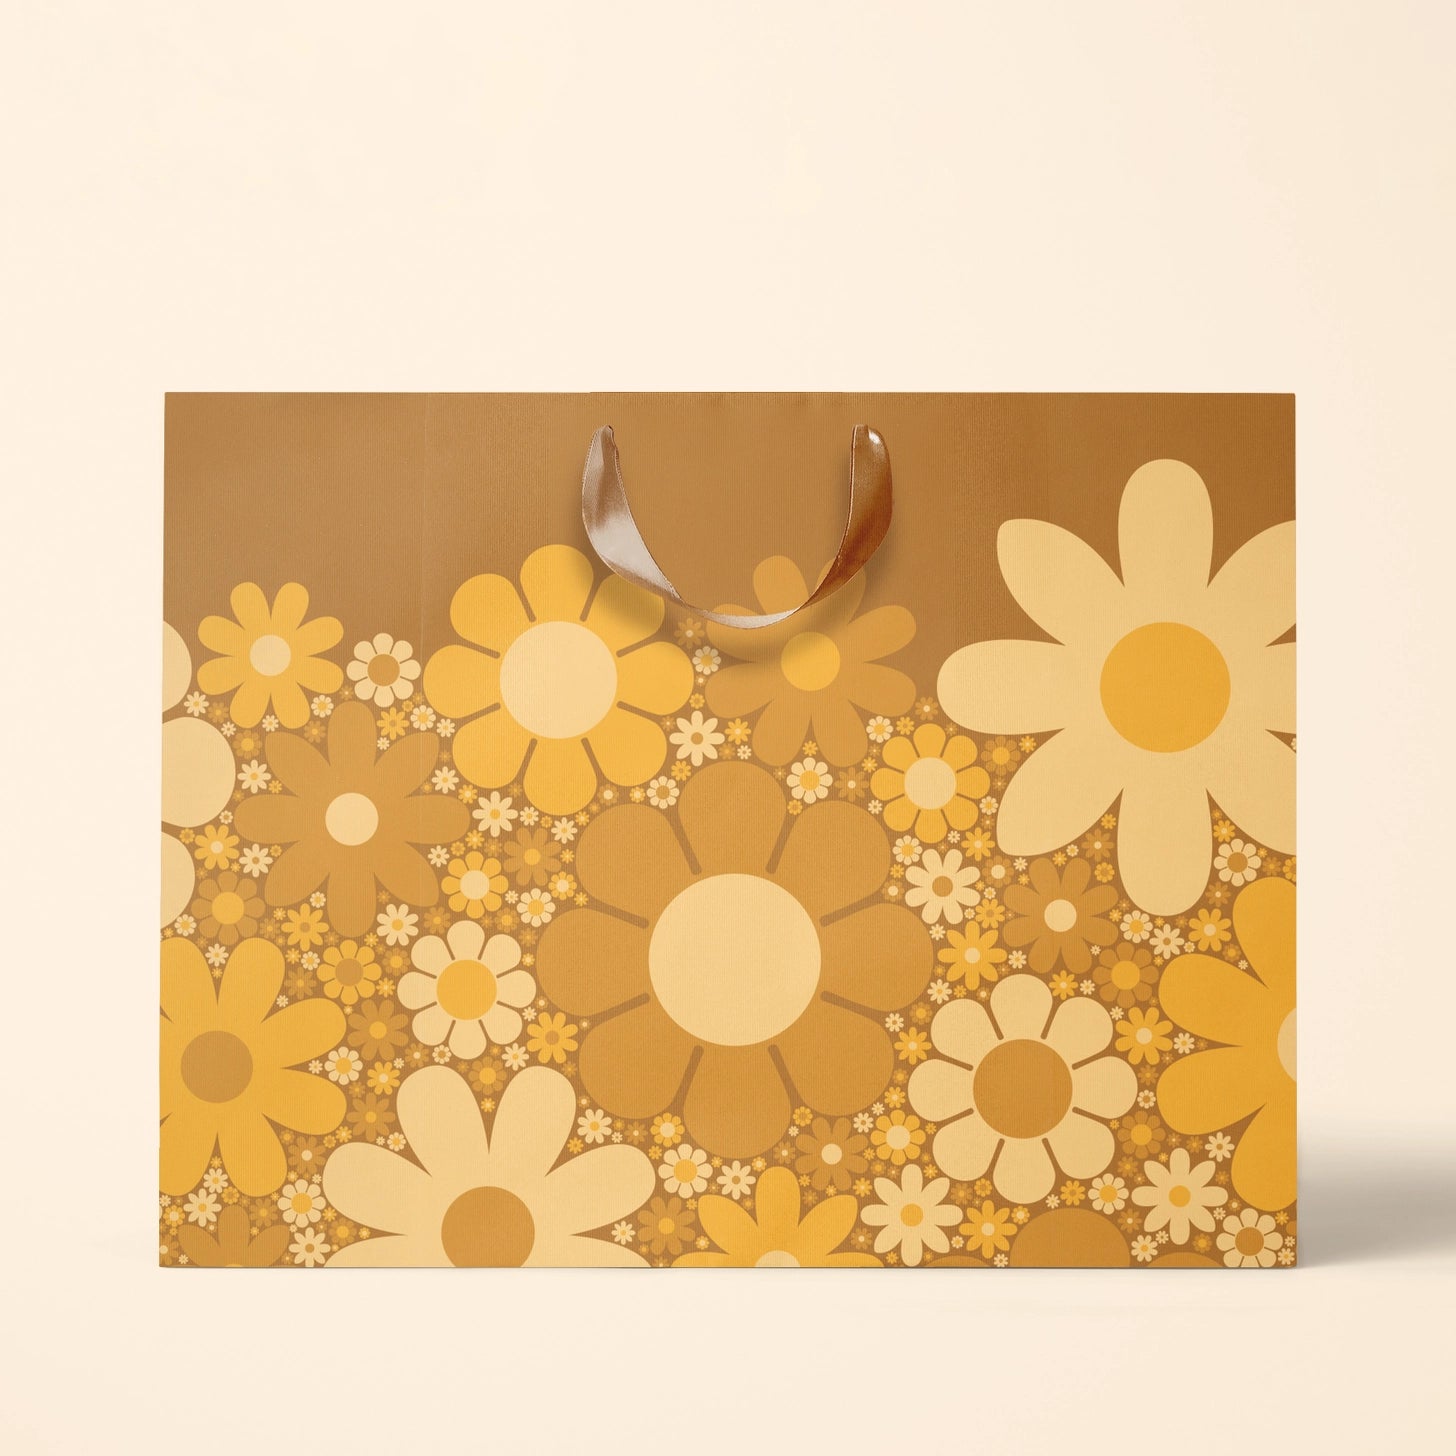 On a white background is a brown gift bag with yellow daisies. 